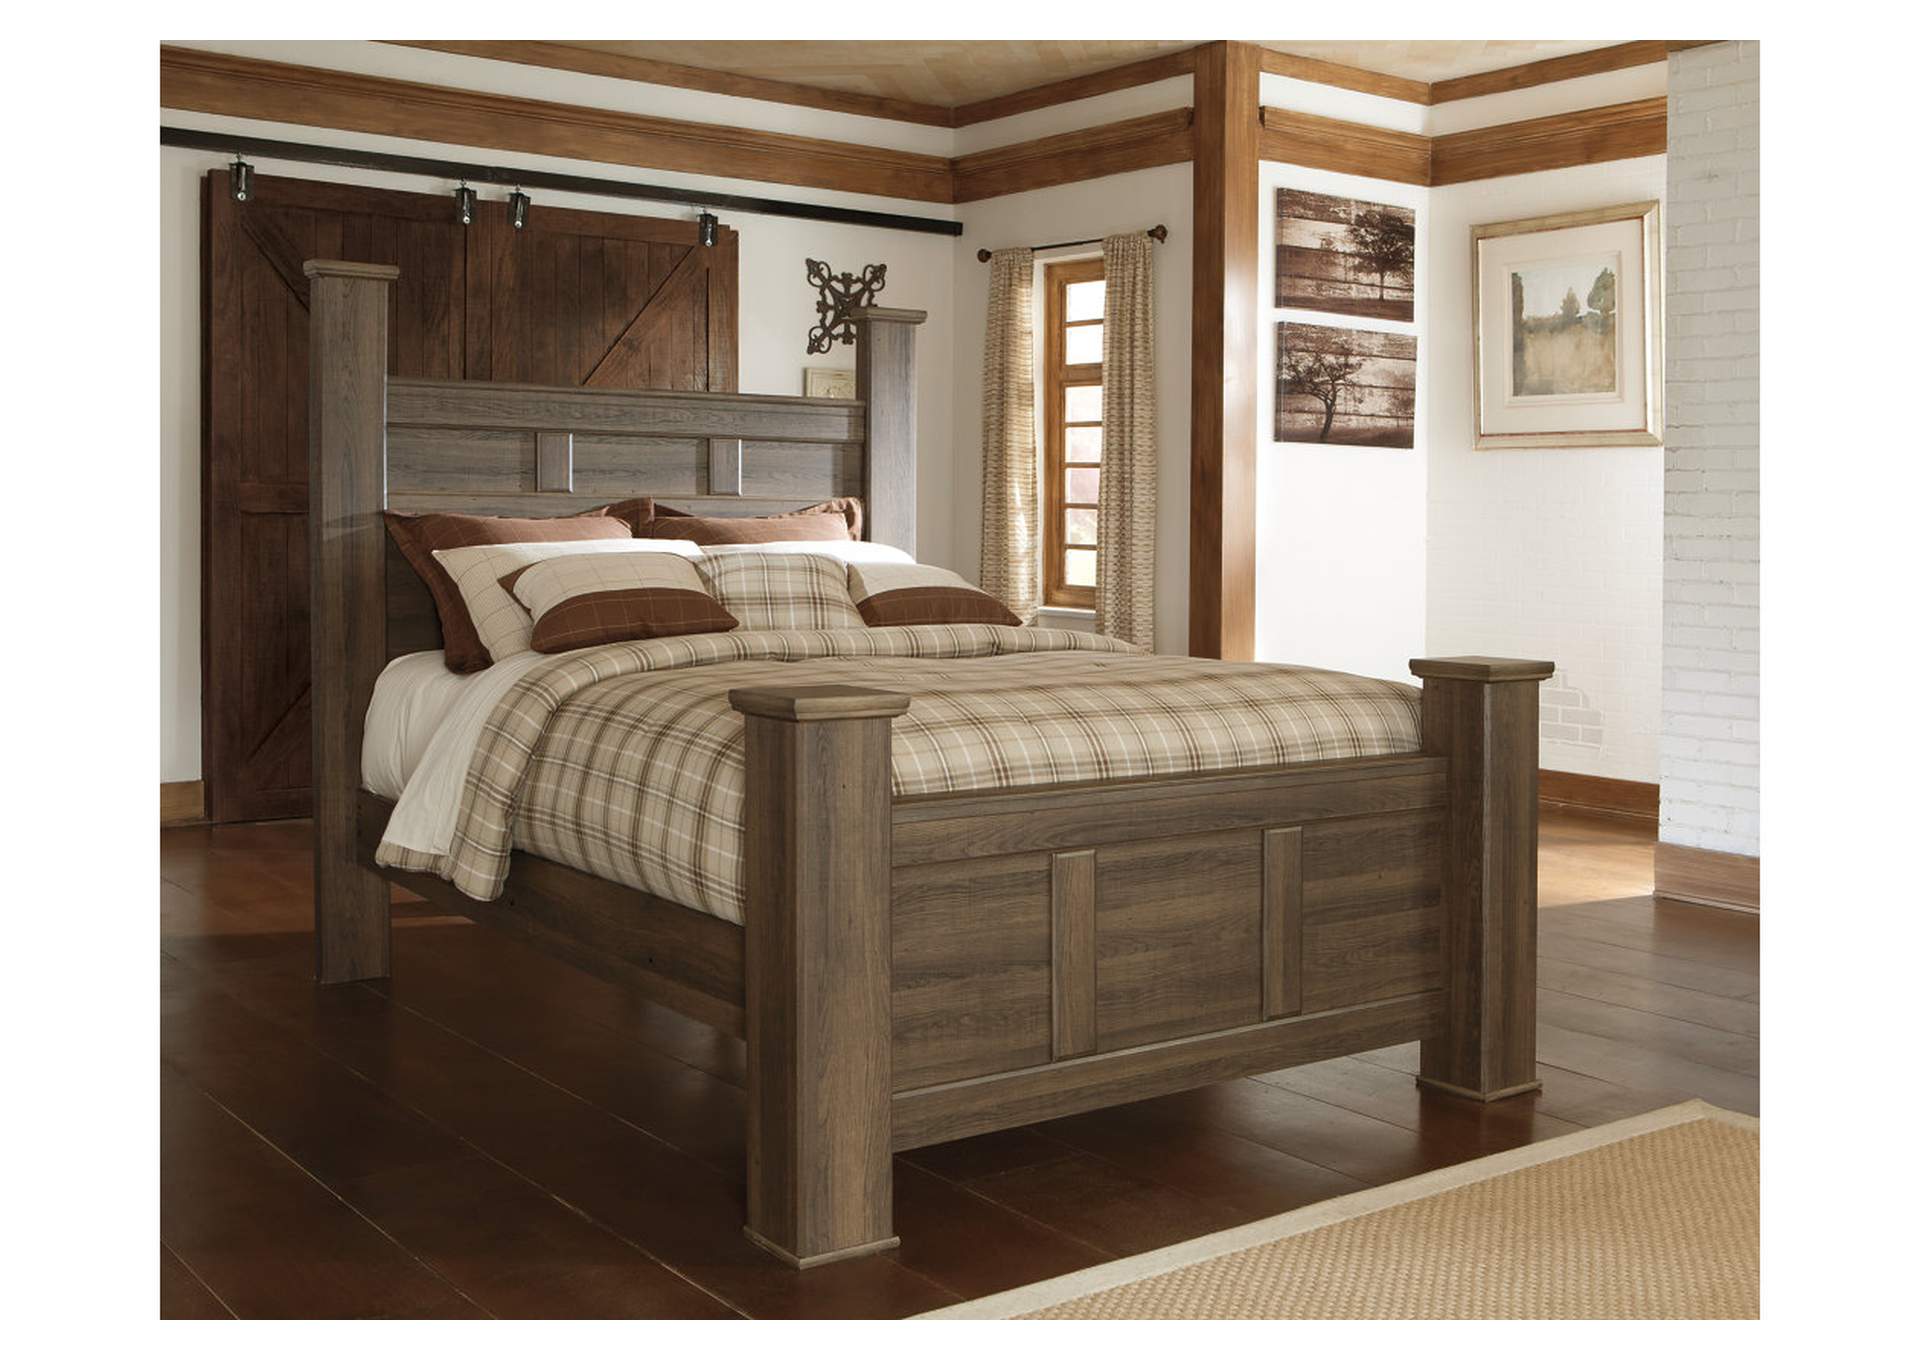 Juararo Queen Poster Bed with Mirrored Dresser and 2 Nightstands,Signature Design By Ashley